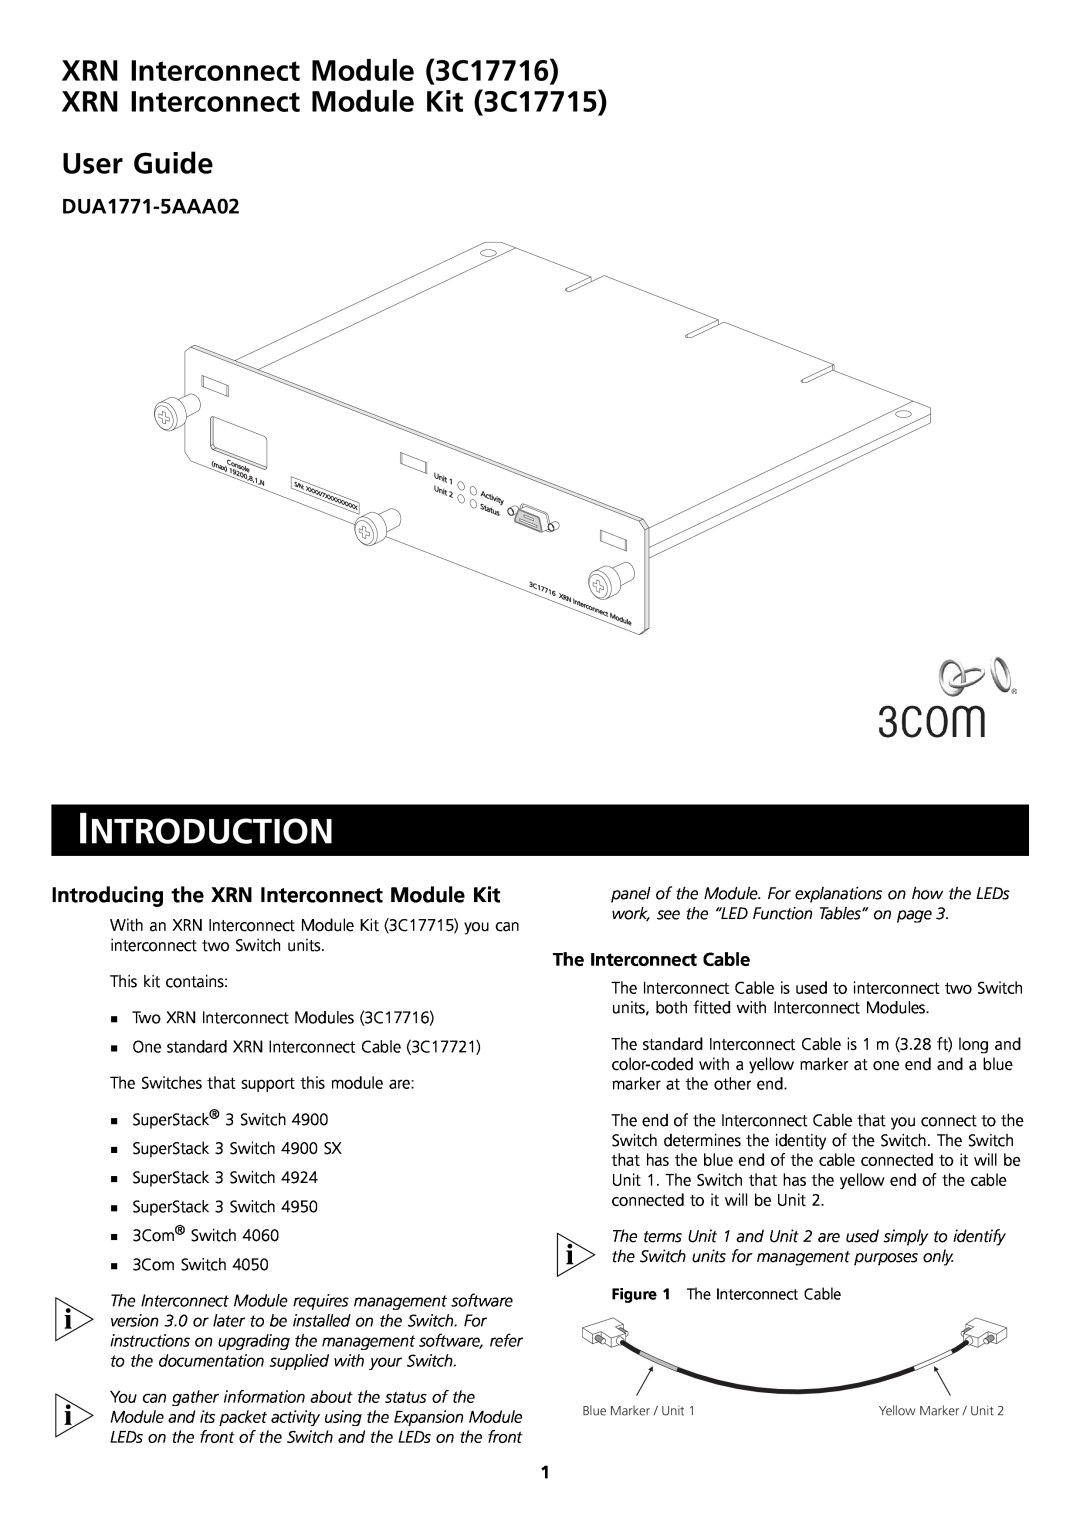 3Com 3C17716 manual Introduction, DUA1771-5AAA02, Introducing the XRN Interconnect Module Kit, The Interconnect Cable 